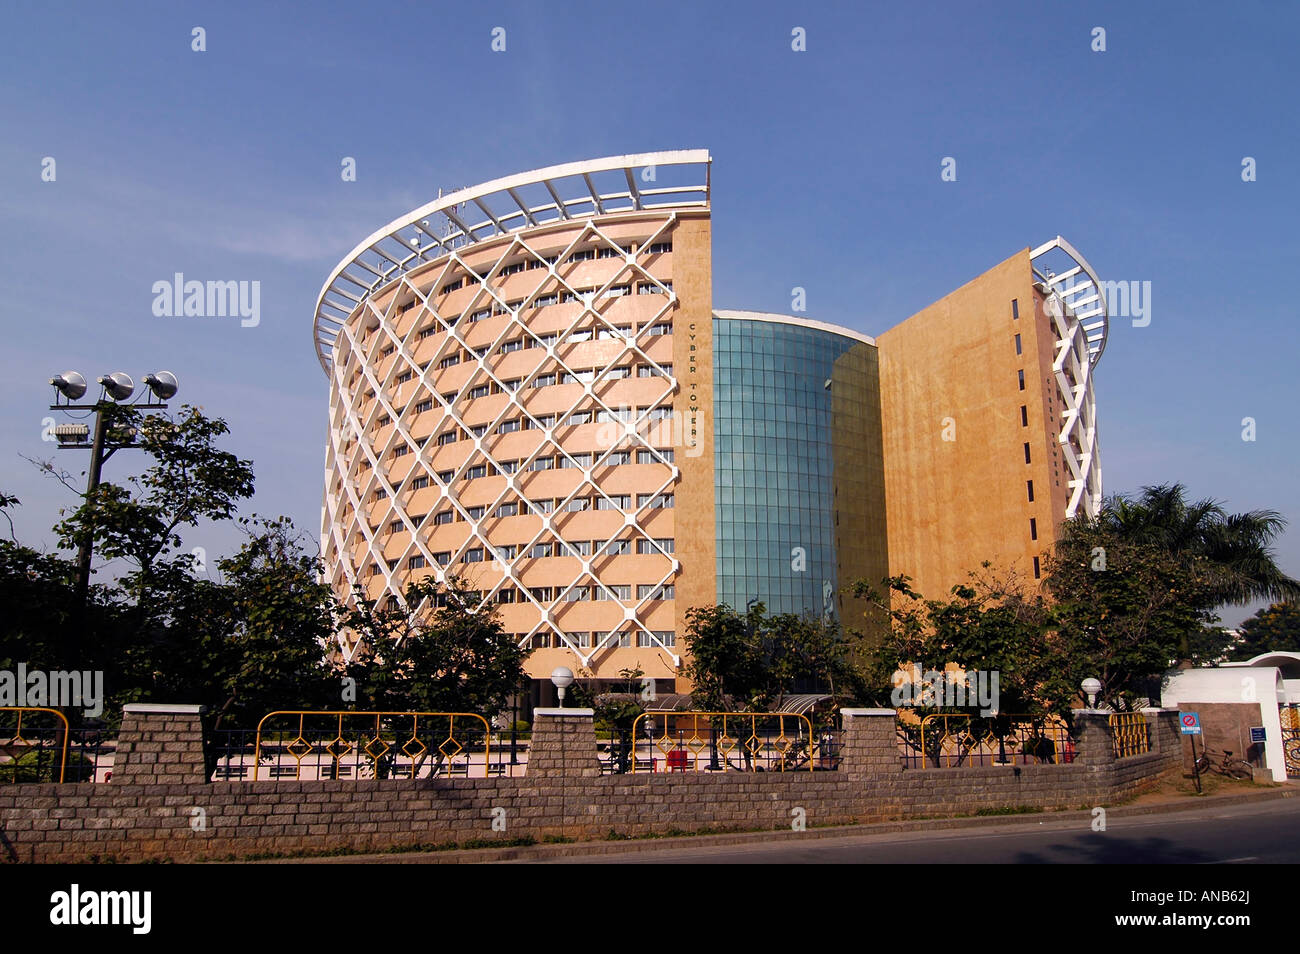 The Wipro Building In Hyderabad S Cyberabad India Wiipro Is A Software Technology Company Stock Photo Alamy